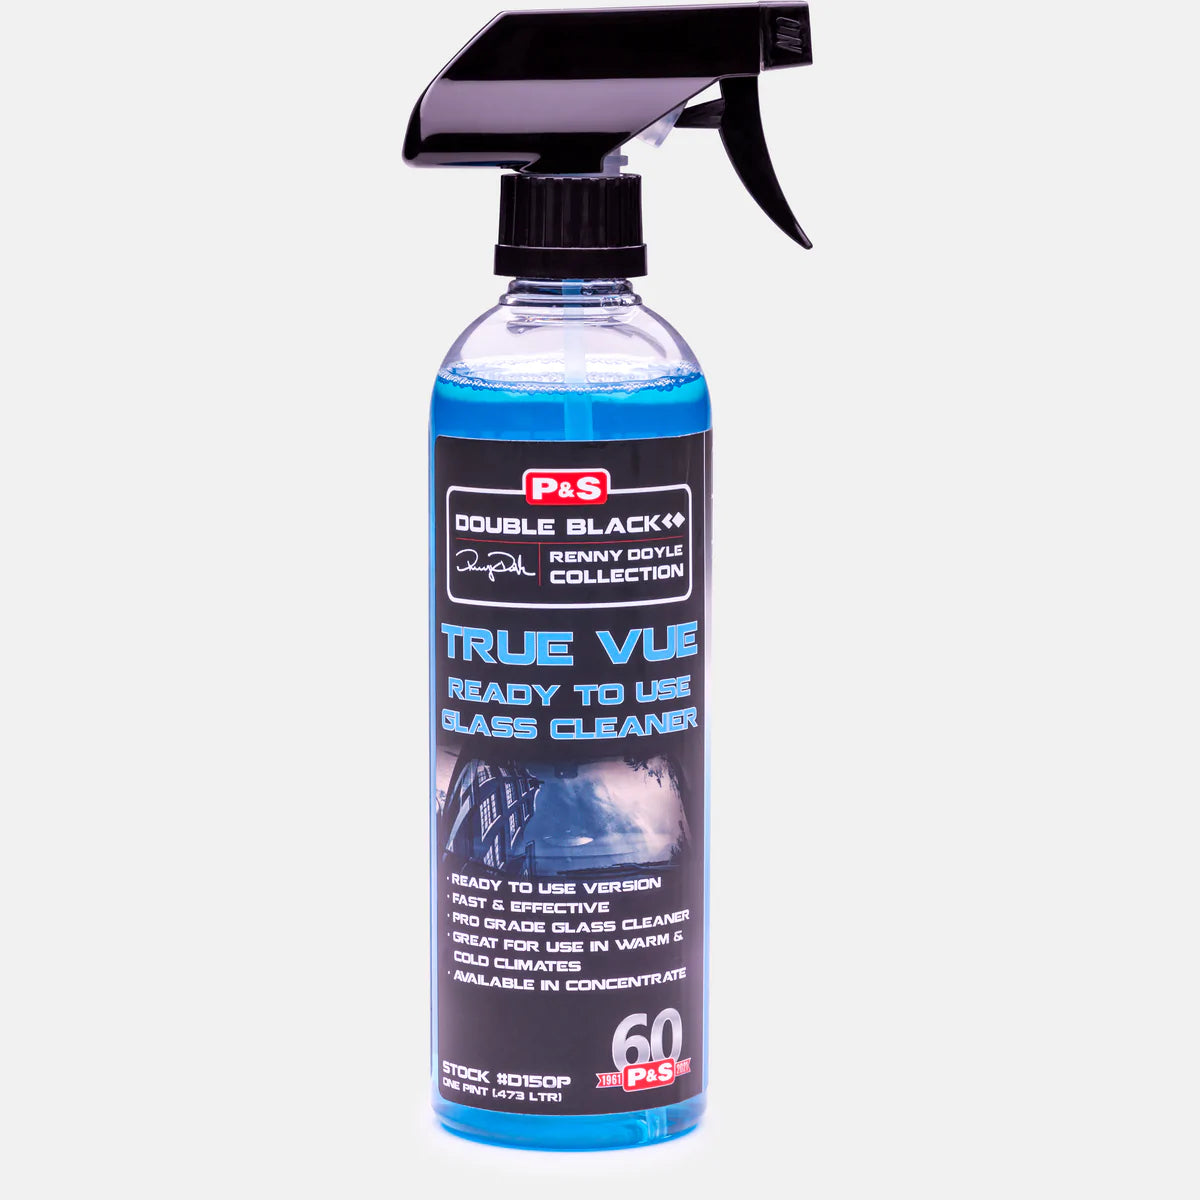 P&S True Vue Glass Cleaner version Ready to Use